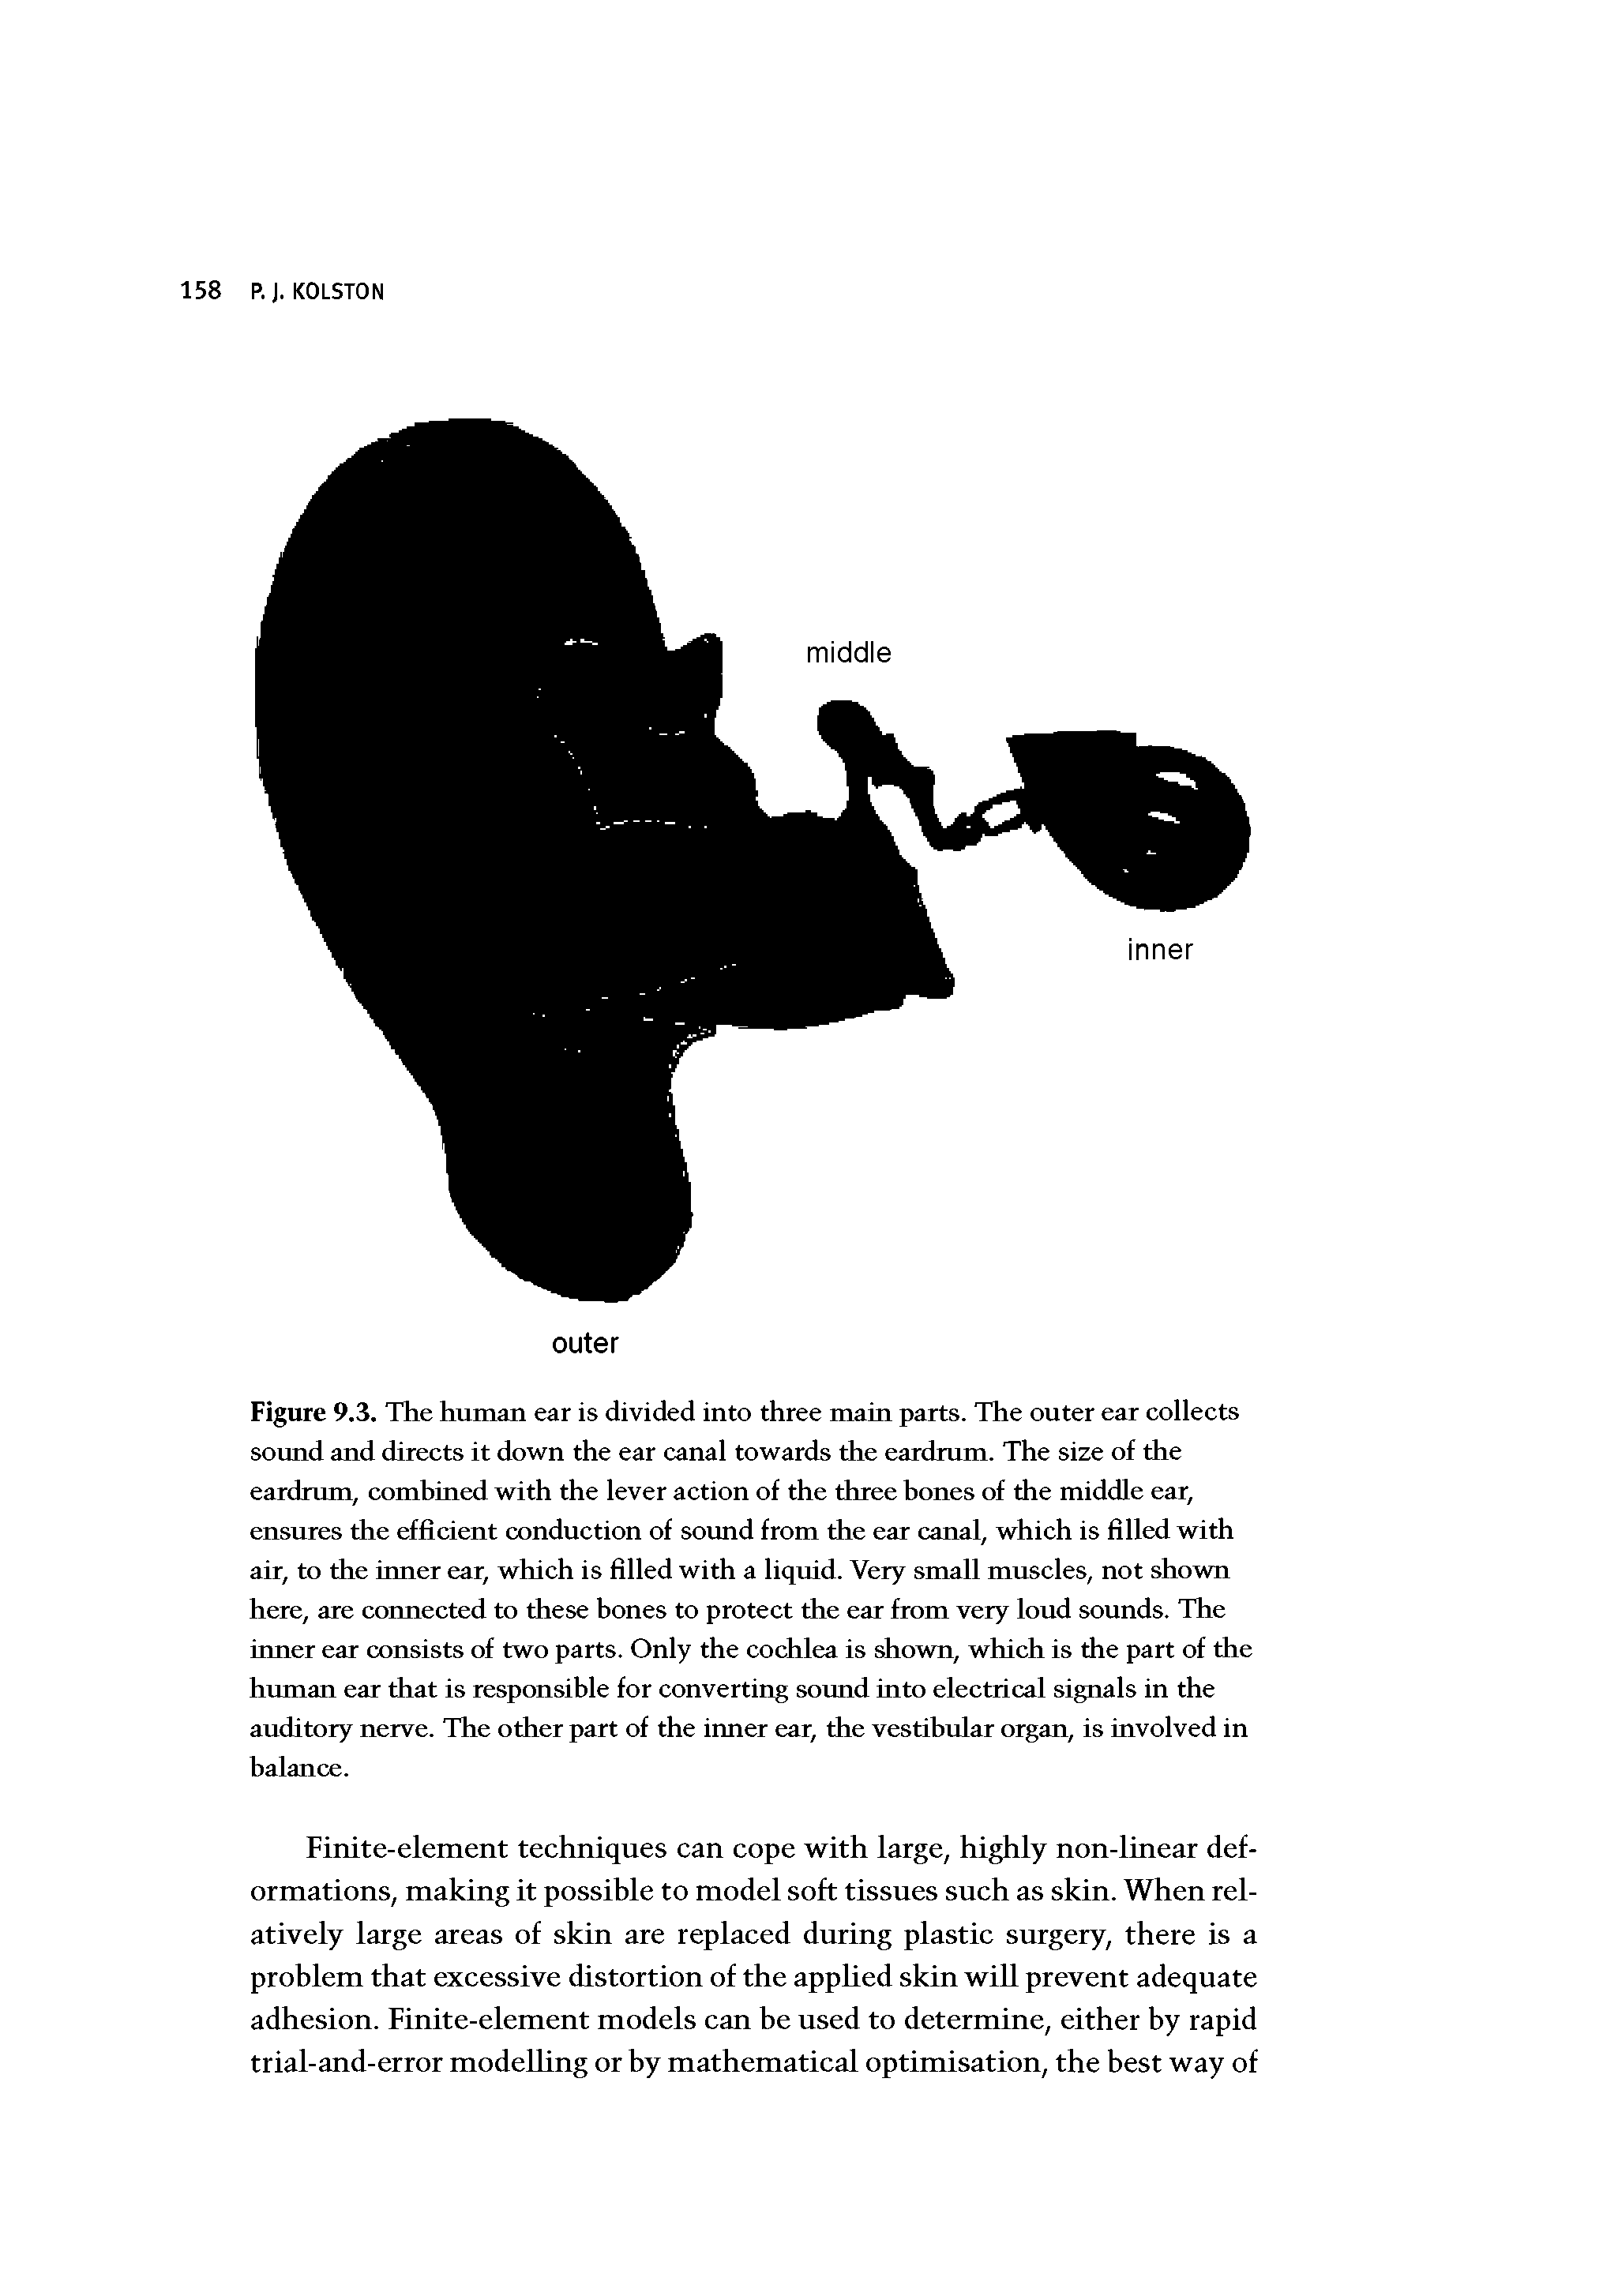 Figure 9.3. The human ear is divided into three main parts. The outer ear collects sound and directs it down the ear canal towards the eardrum. The size of the eardrum, comhined with the lever action of the three hones of the middle ear, ensures the efficient conduction of sound from the ear canal, which is filled with air, to the inner ear, which is filled with a liquid. Very small muscles, not shown here, are cormected to these bones to protect the ear from very lond sounds. The inner ear consists of two parts. Only the cochlea is shown, which is the part of the human ear that is responsible for converting sound into electrical signals in the auditory nerve. The other part of the inner ear, the vestibular organ, is involved in balance.